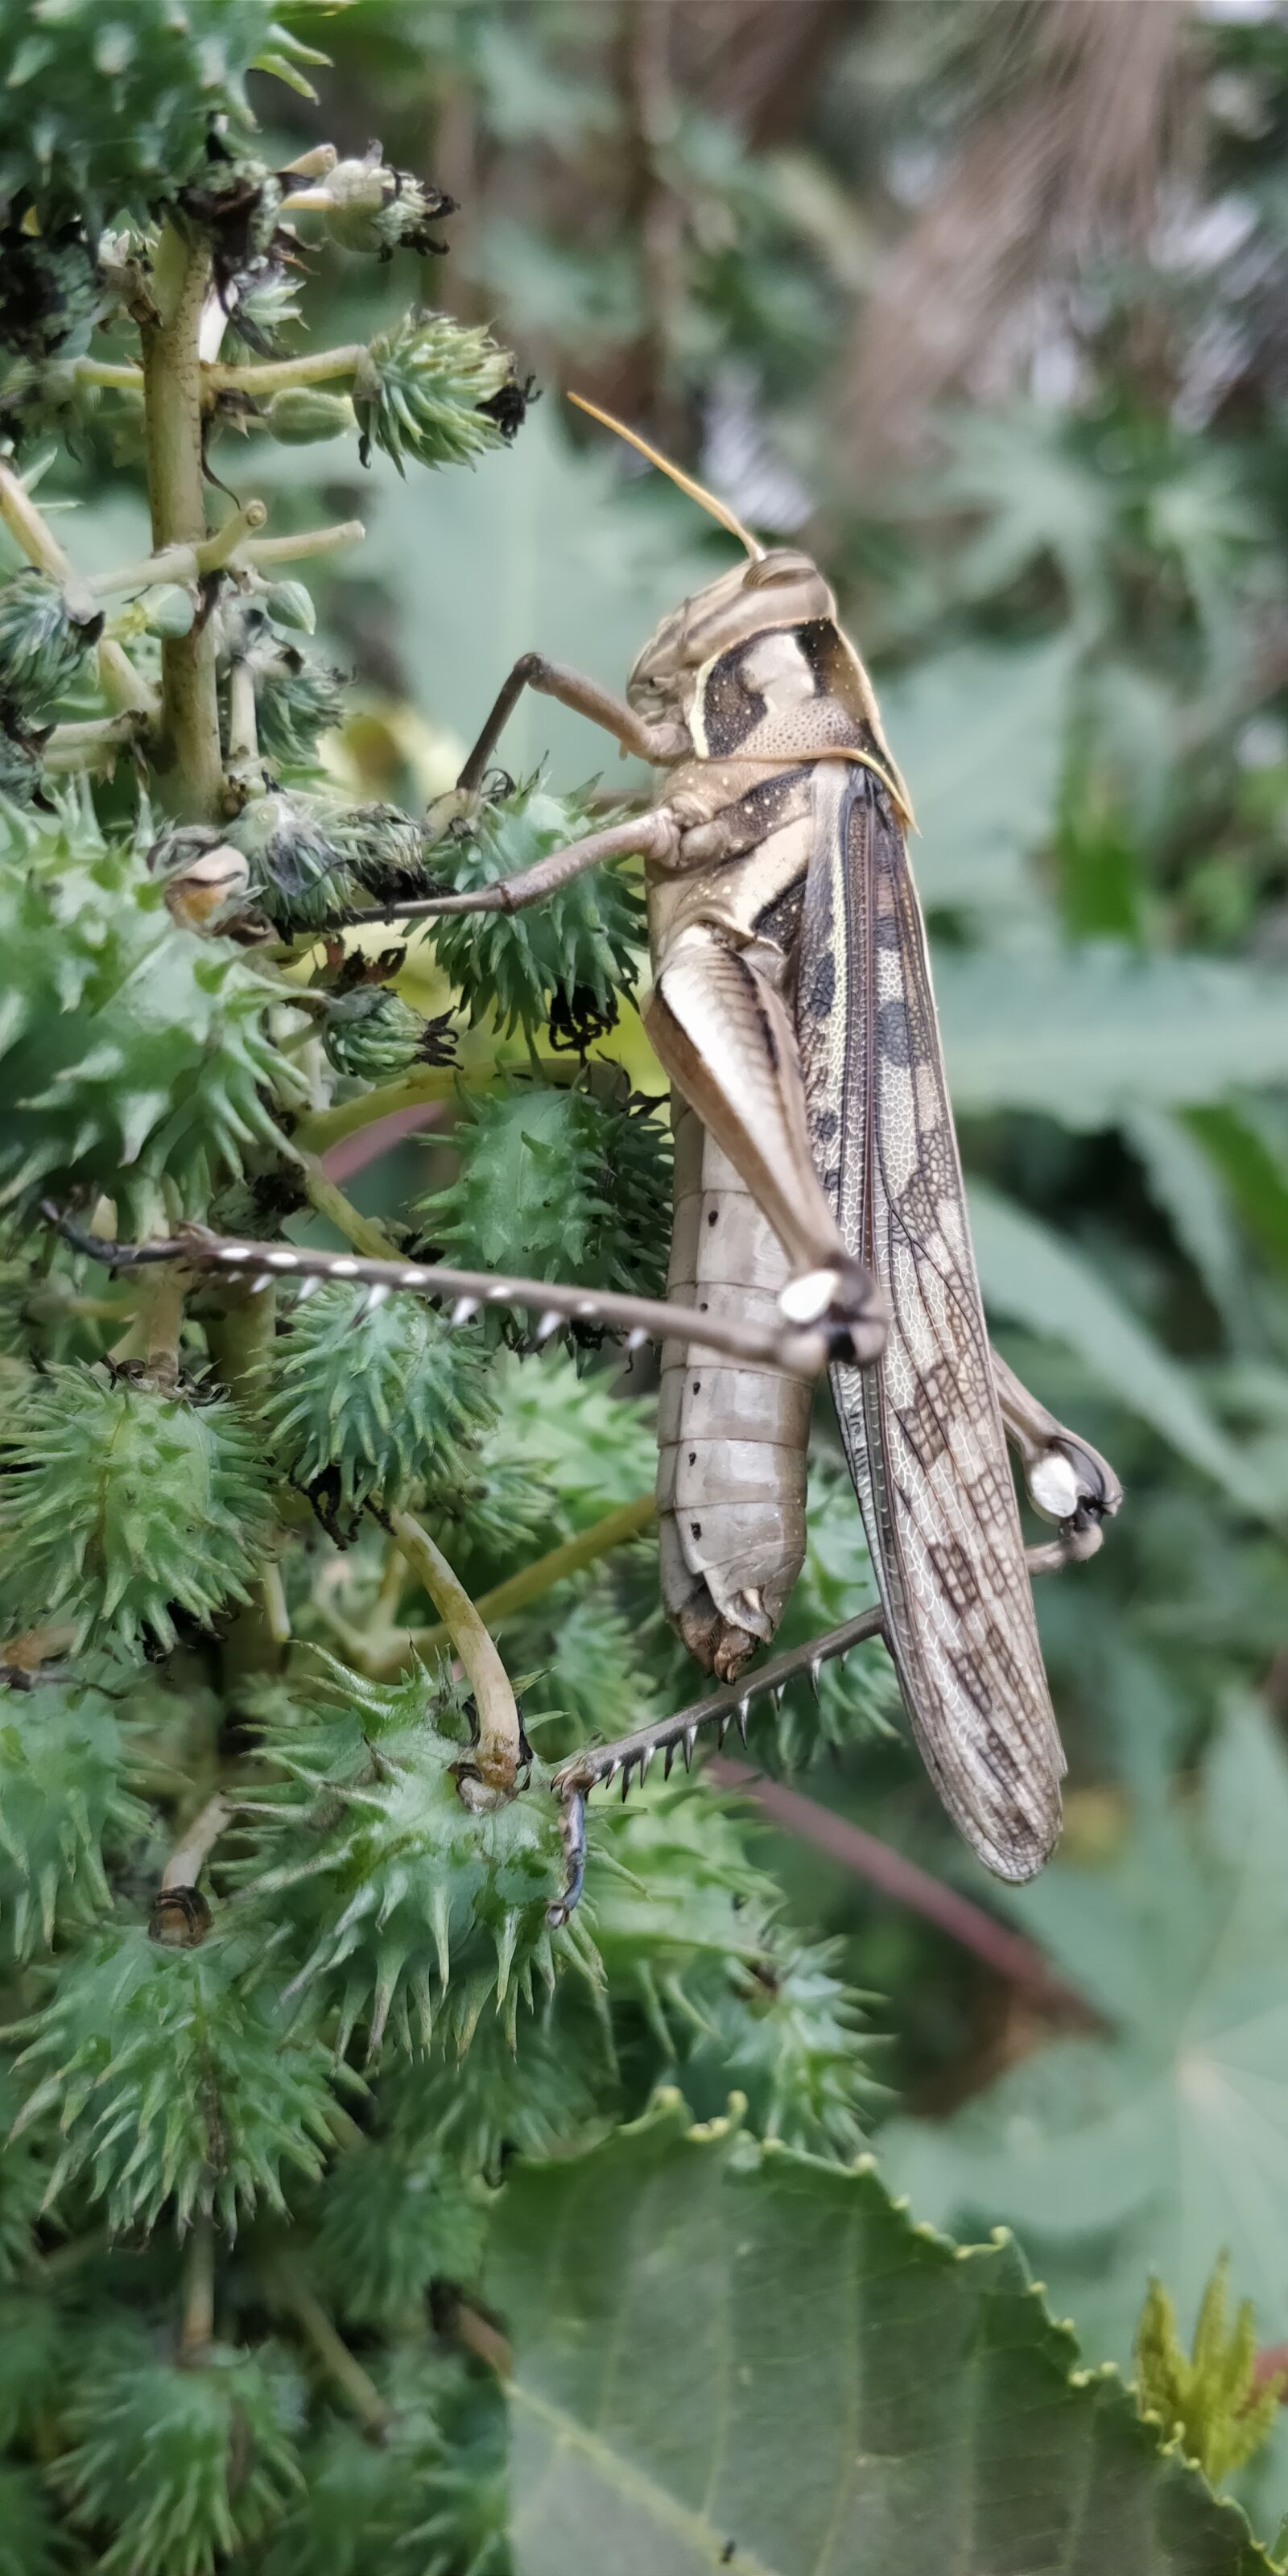 OnePlus 5T sample photo. Nature, insect, animal photography